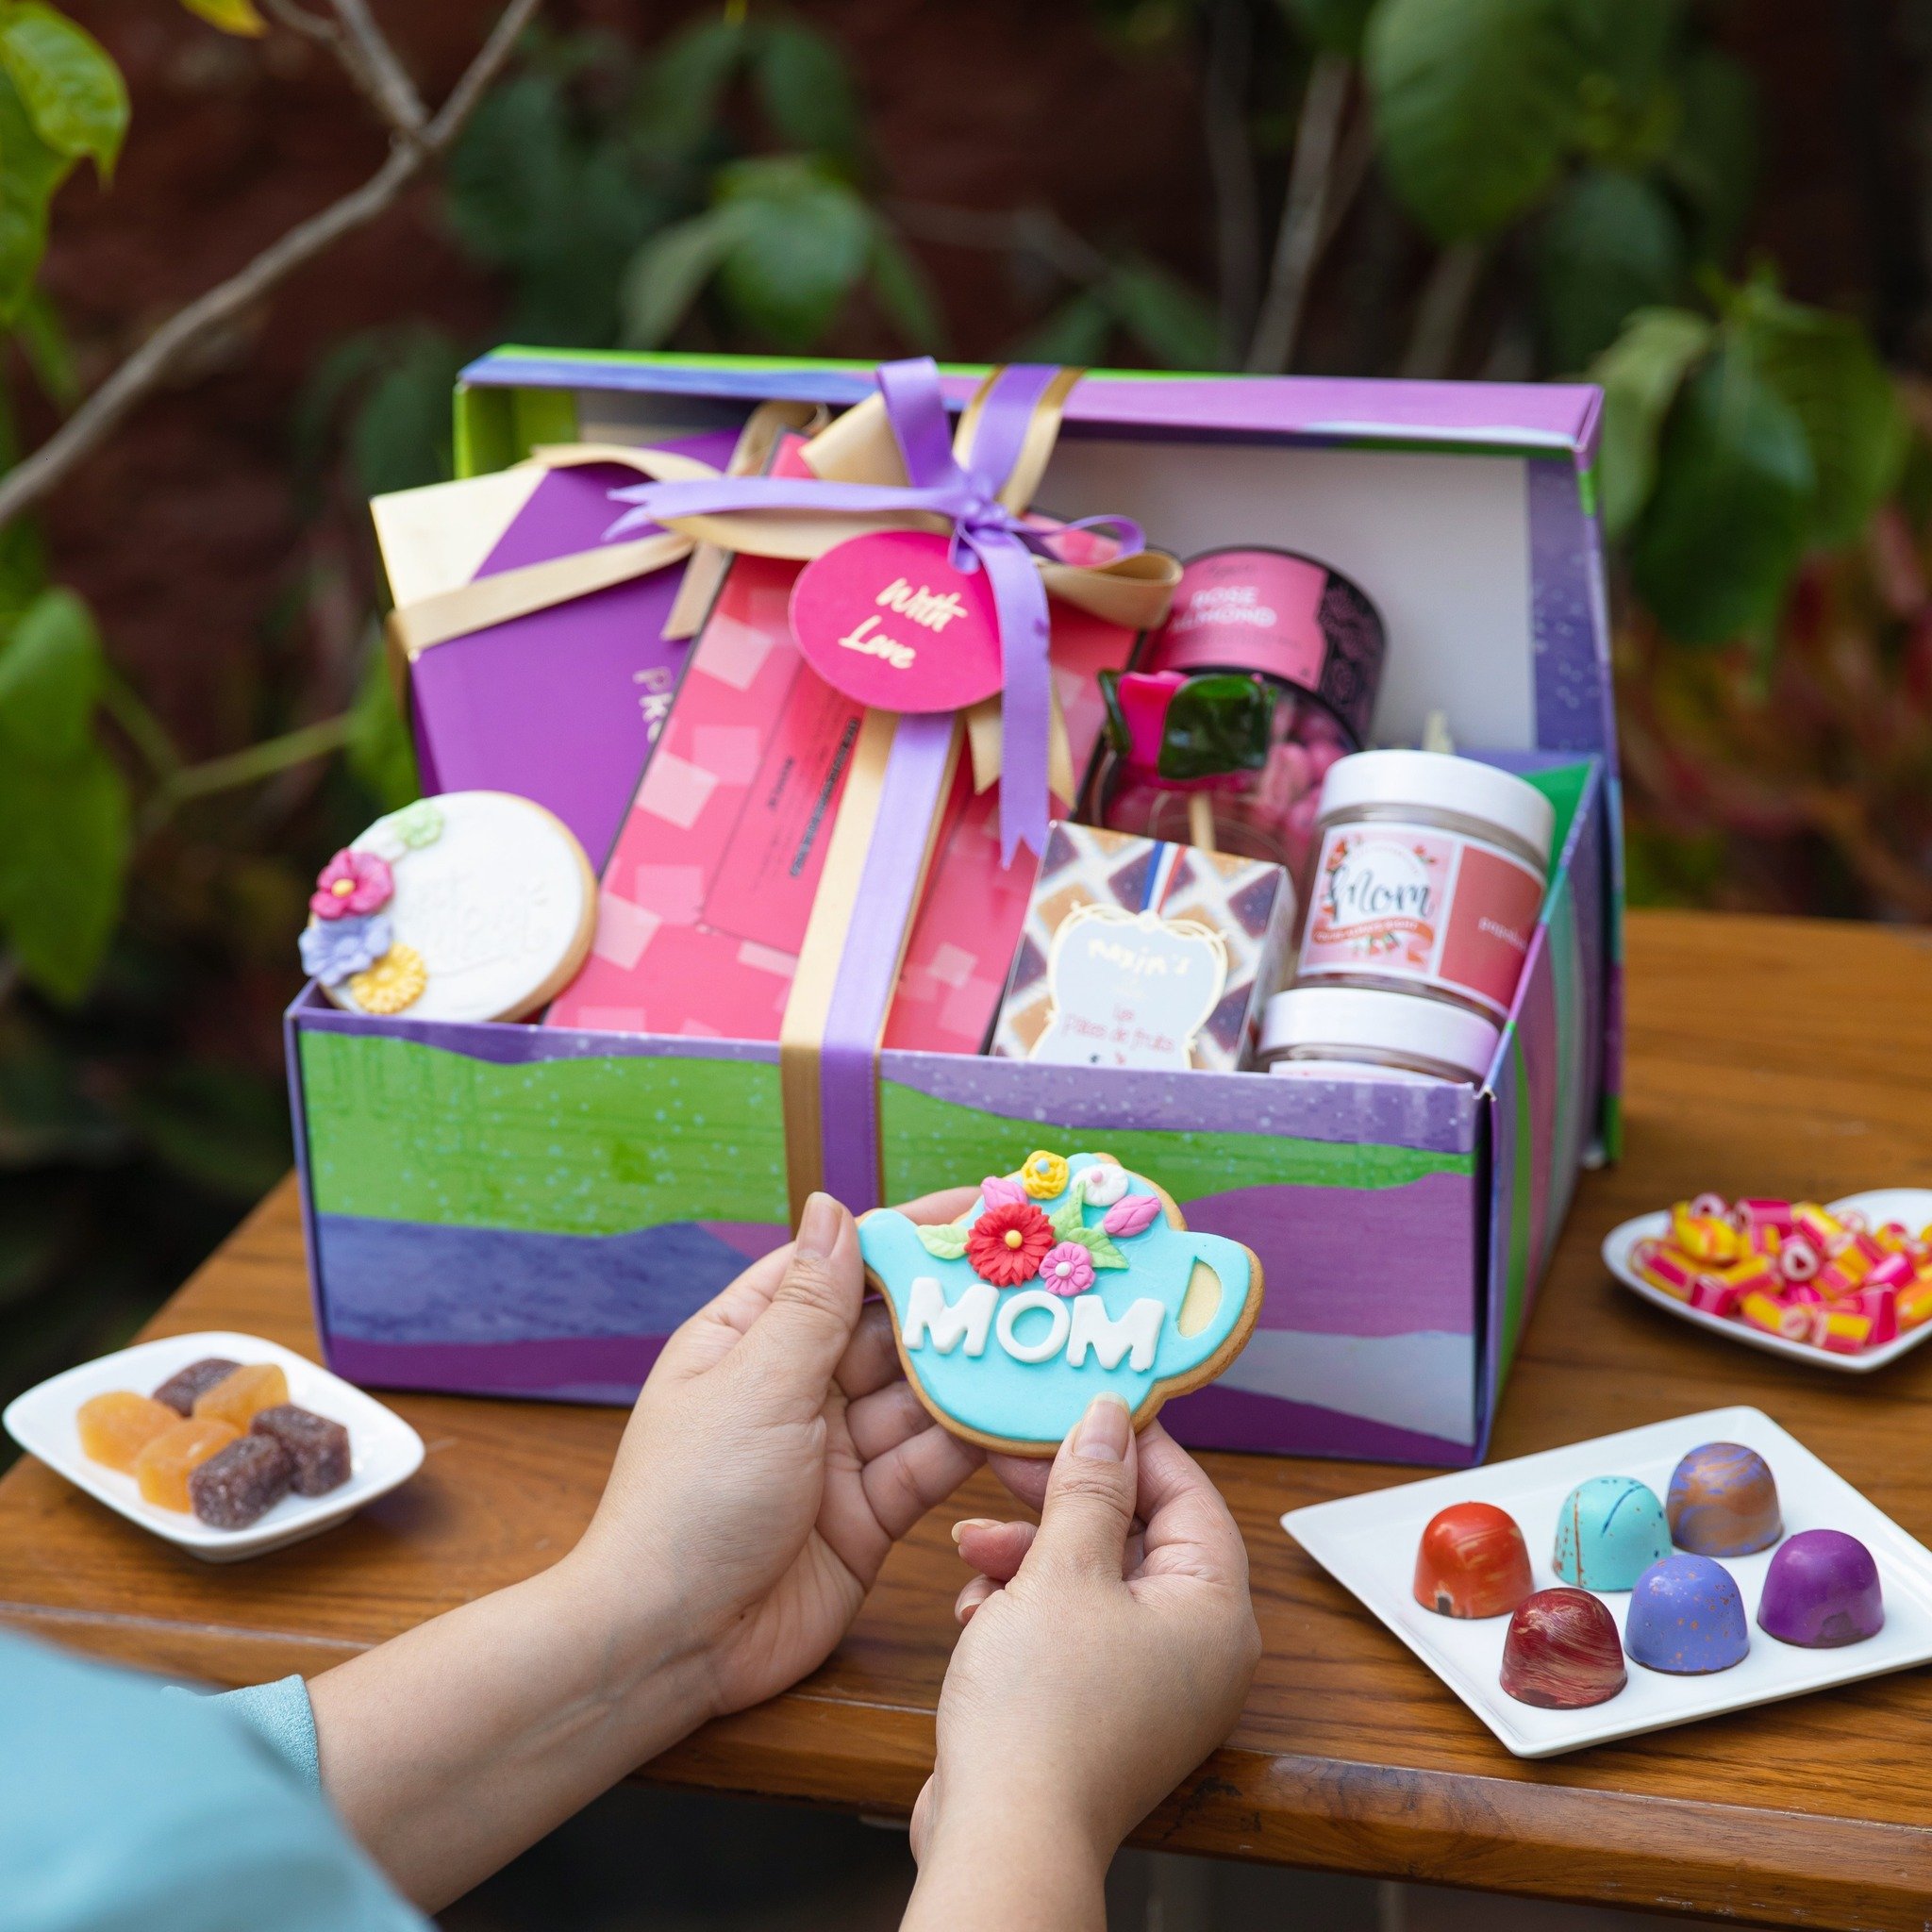 🌸 Sweeten Mother&rsquo;s Day 🌸

Show your gratitude with our exclusive 'Thank You Mom' Gift Collection! Treat her to delicious chocolate delights and enjoy special savings. 💝 

Click the link in our bio to explore our collection. #MothersDay #Gift